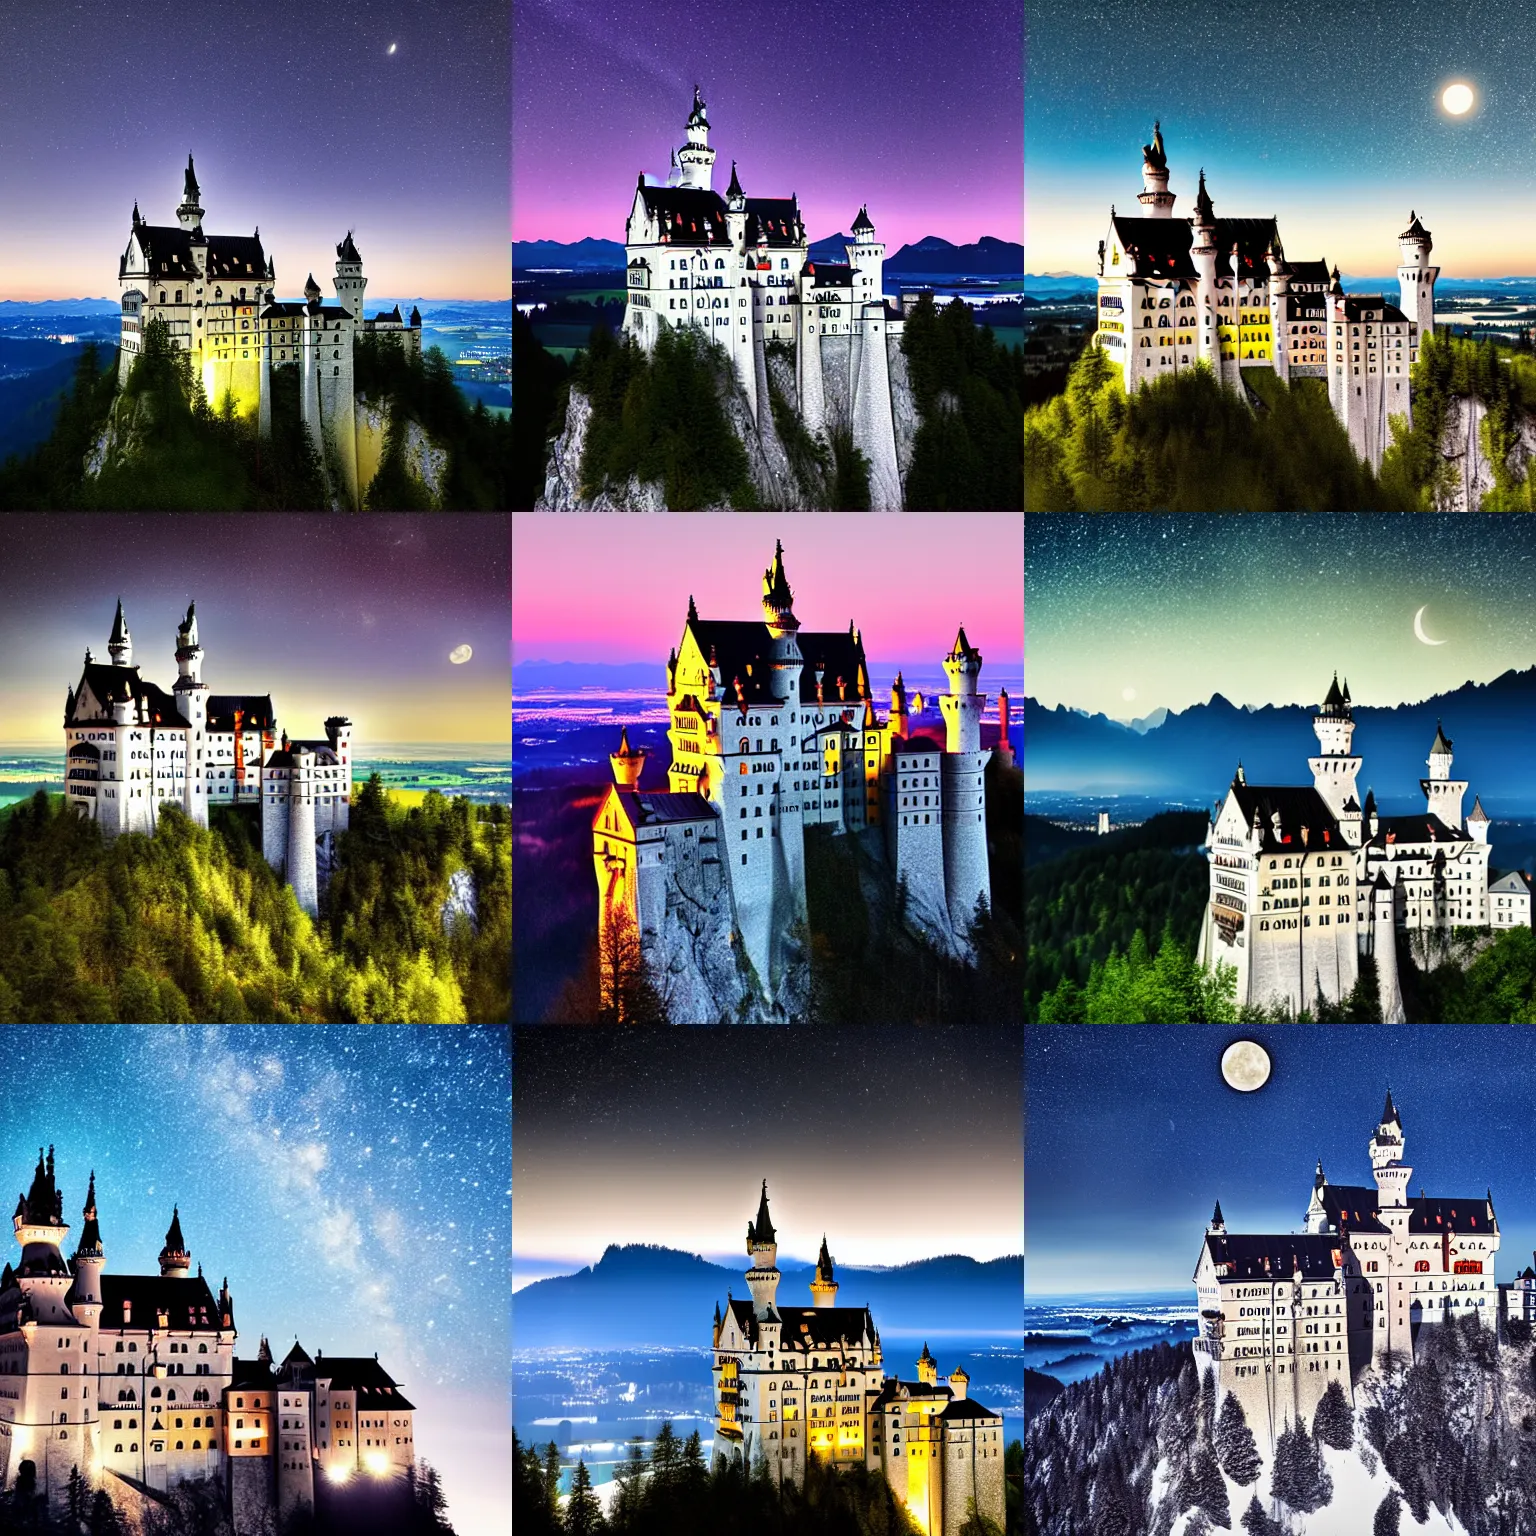 Prompt: a night photo of neuschwanstein castle at night, moonlit, stars, partly cloudy, dslr